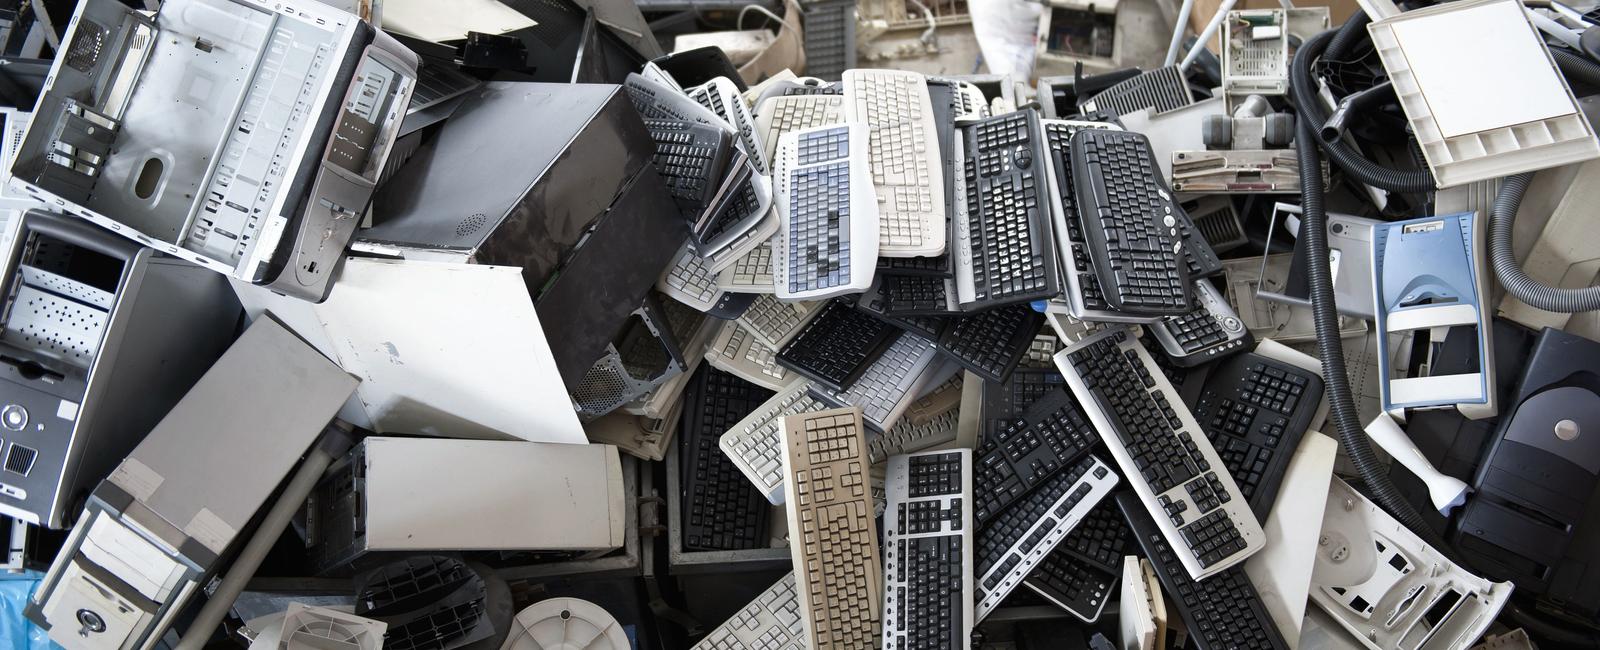 Recycling 1 million laptops saves energy equivalent to the amount of electricity used by 3 500 homes in the united states each year